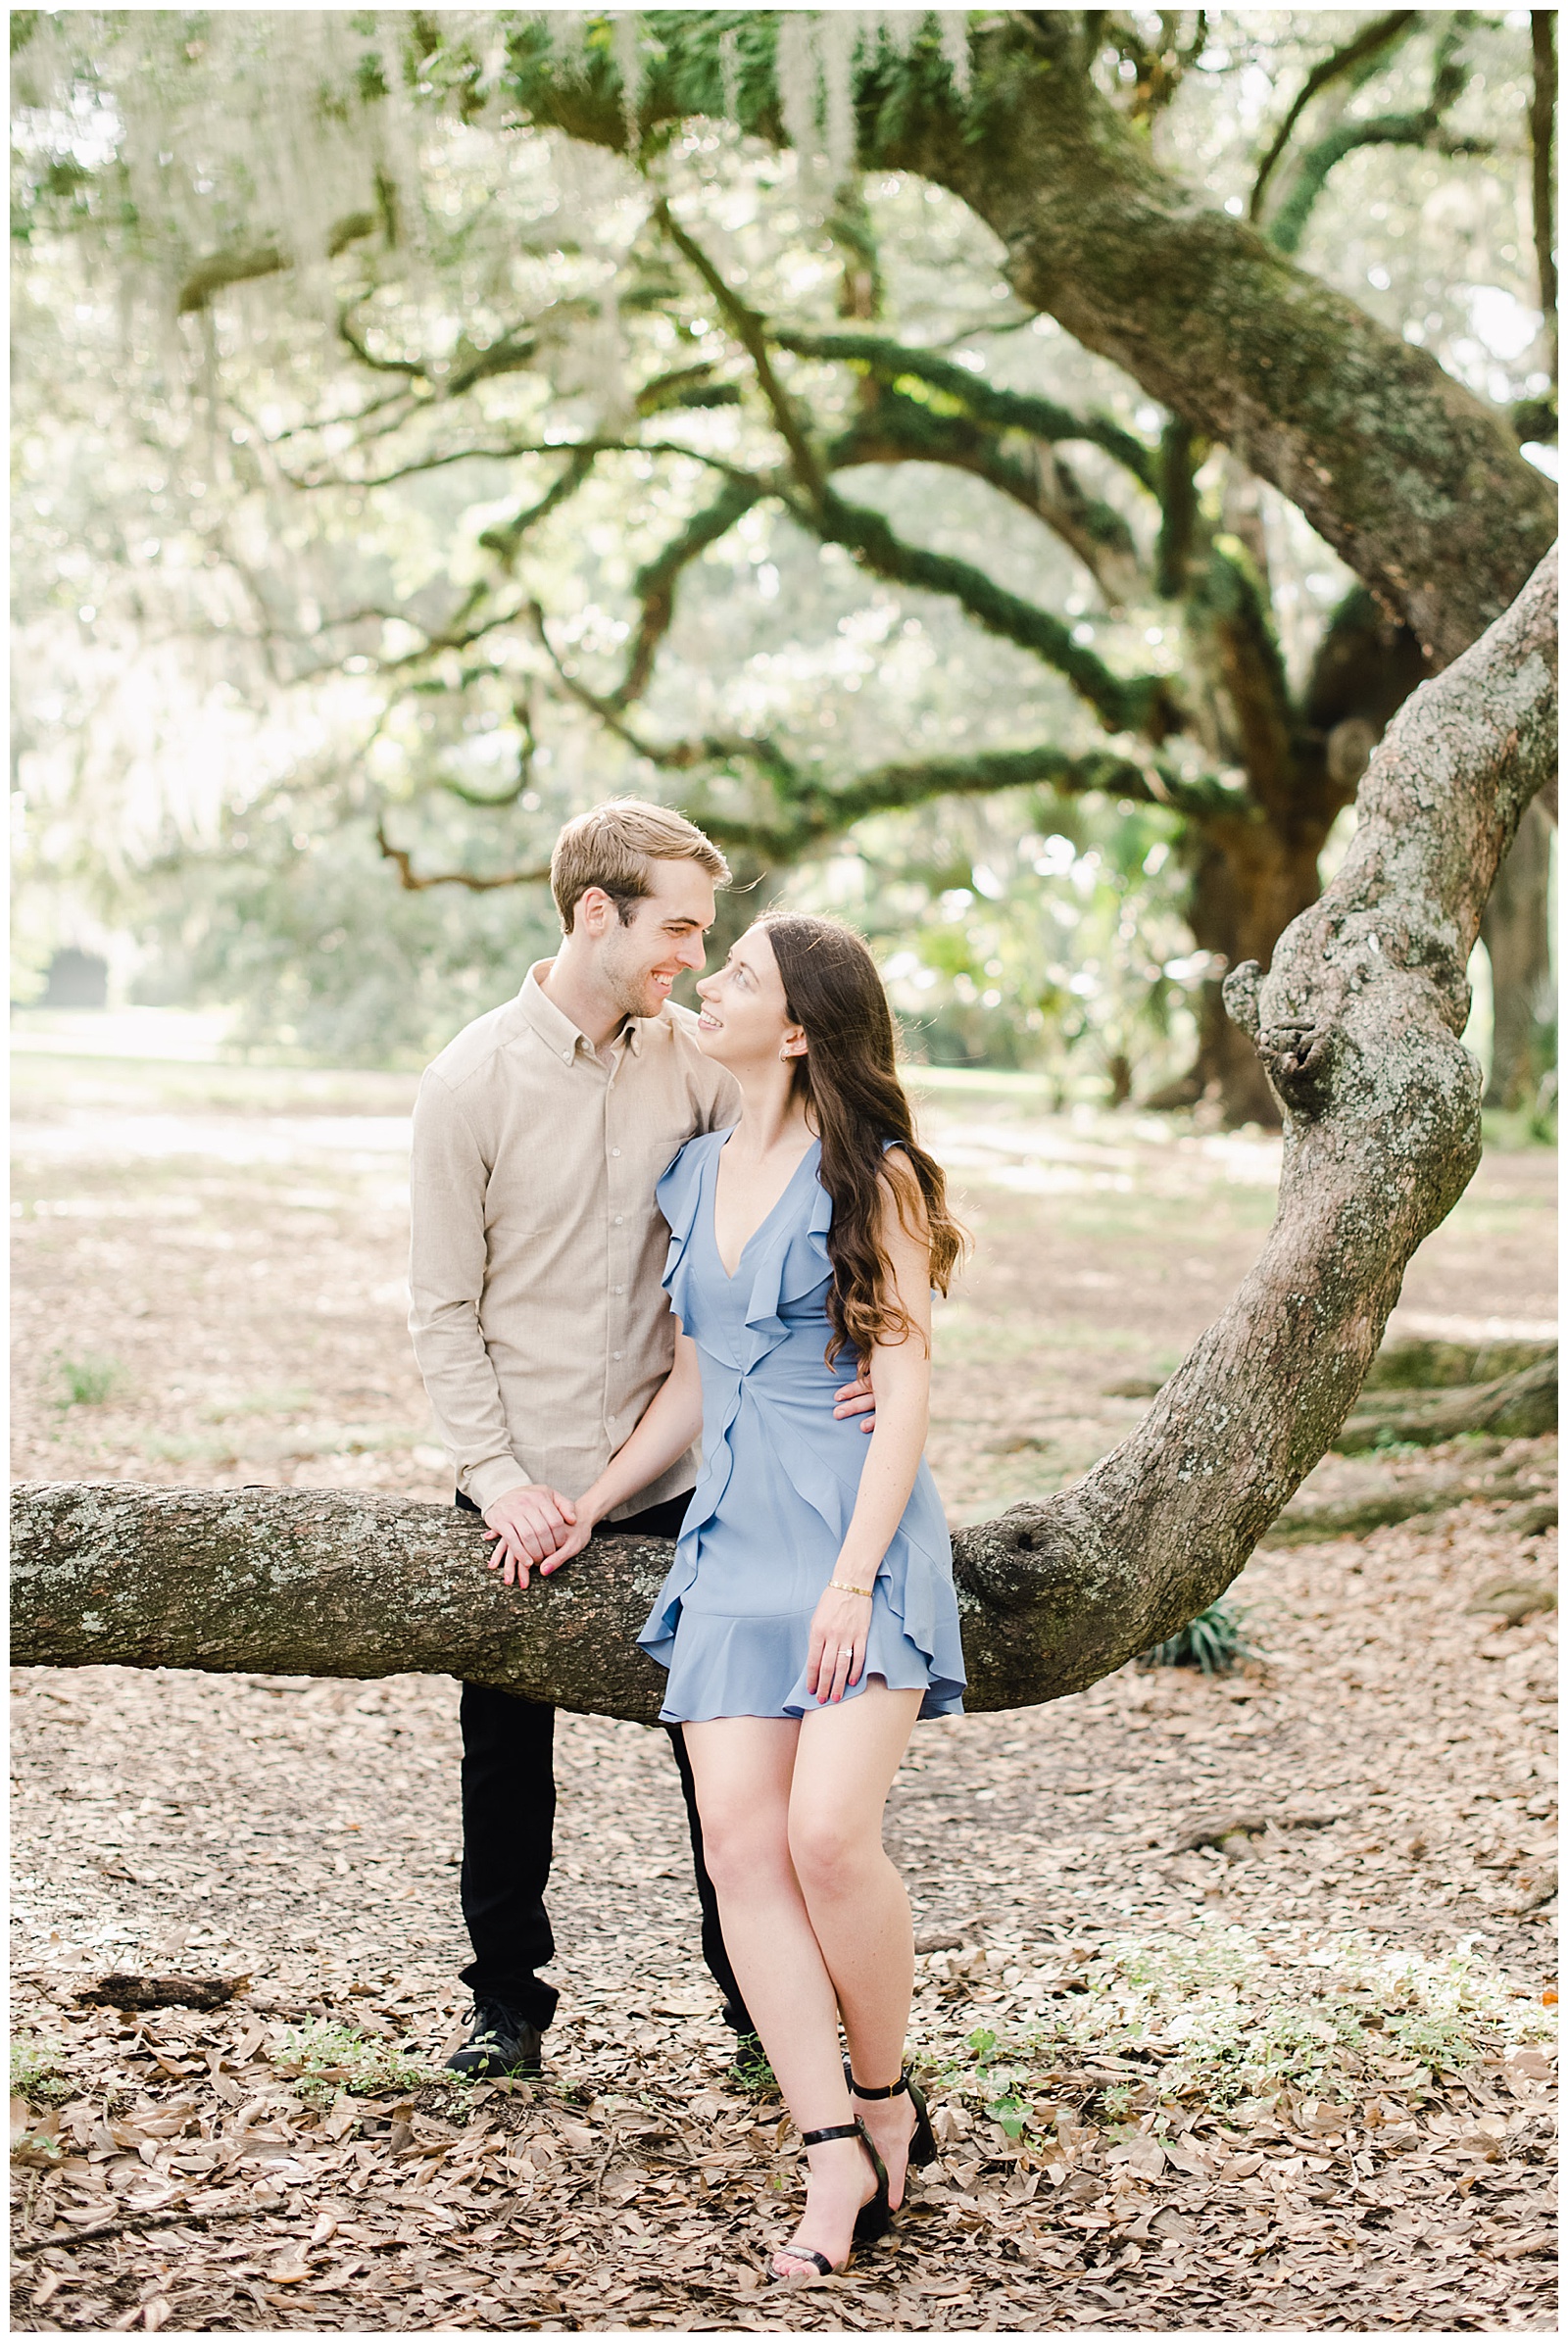 New Orleans Engagement Photos Chelsea Rousey Photography couple in love in city park sitting on tree root